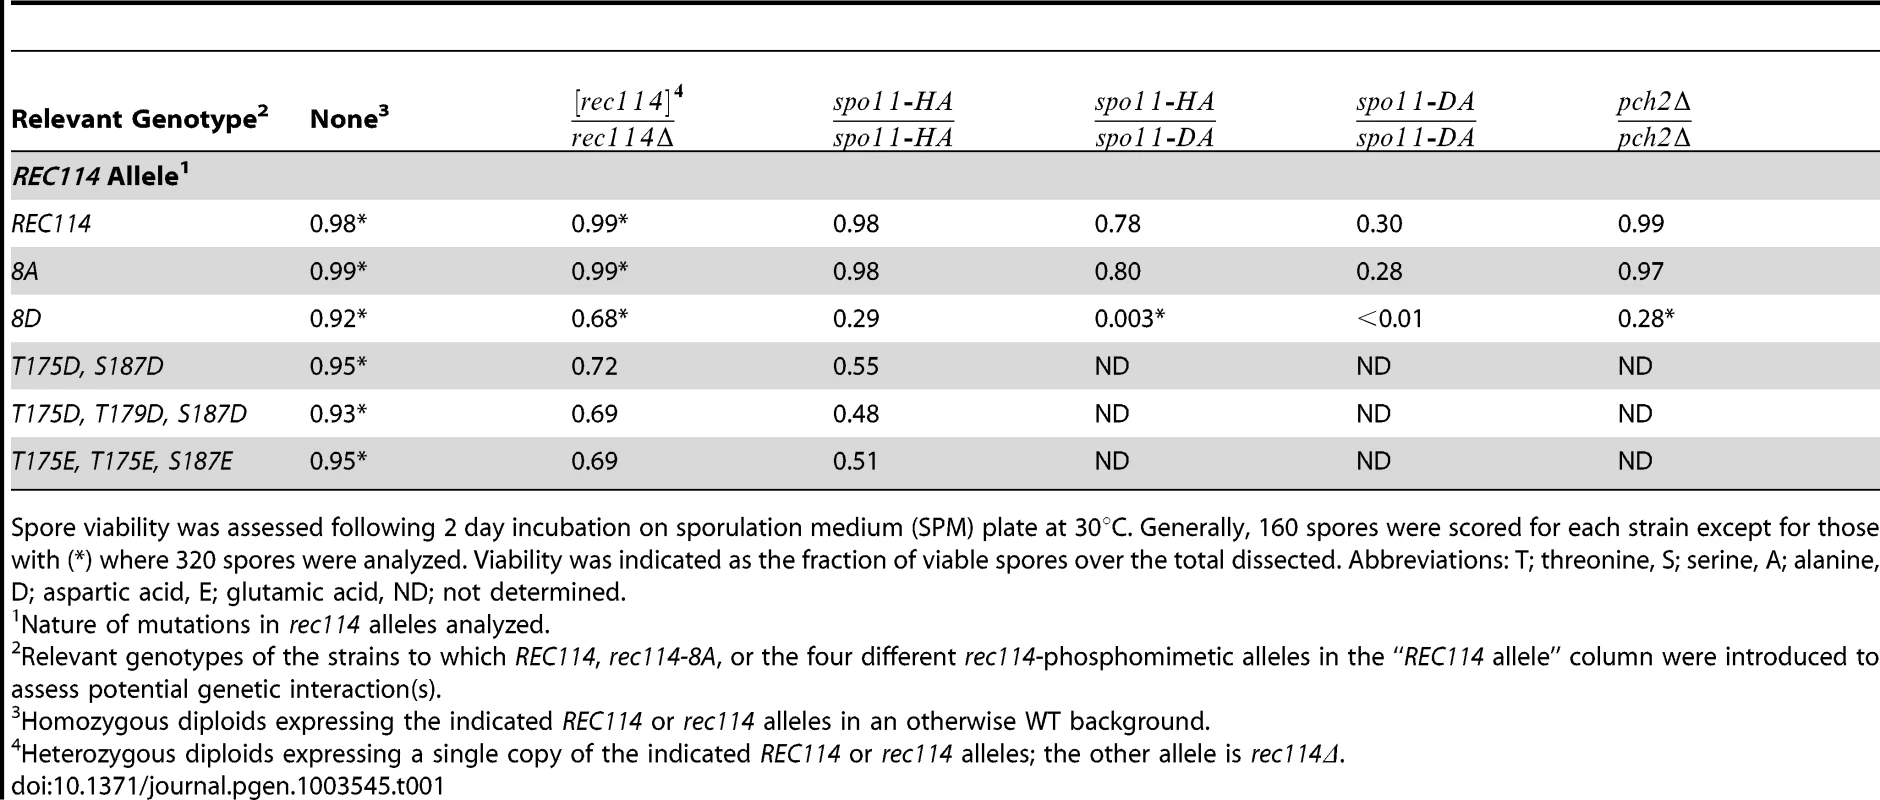 Spore viability of the different <i>rec114</i> alleles in various genetic backgrounds.